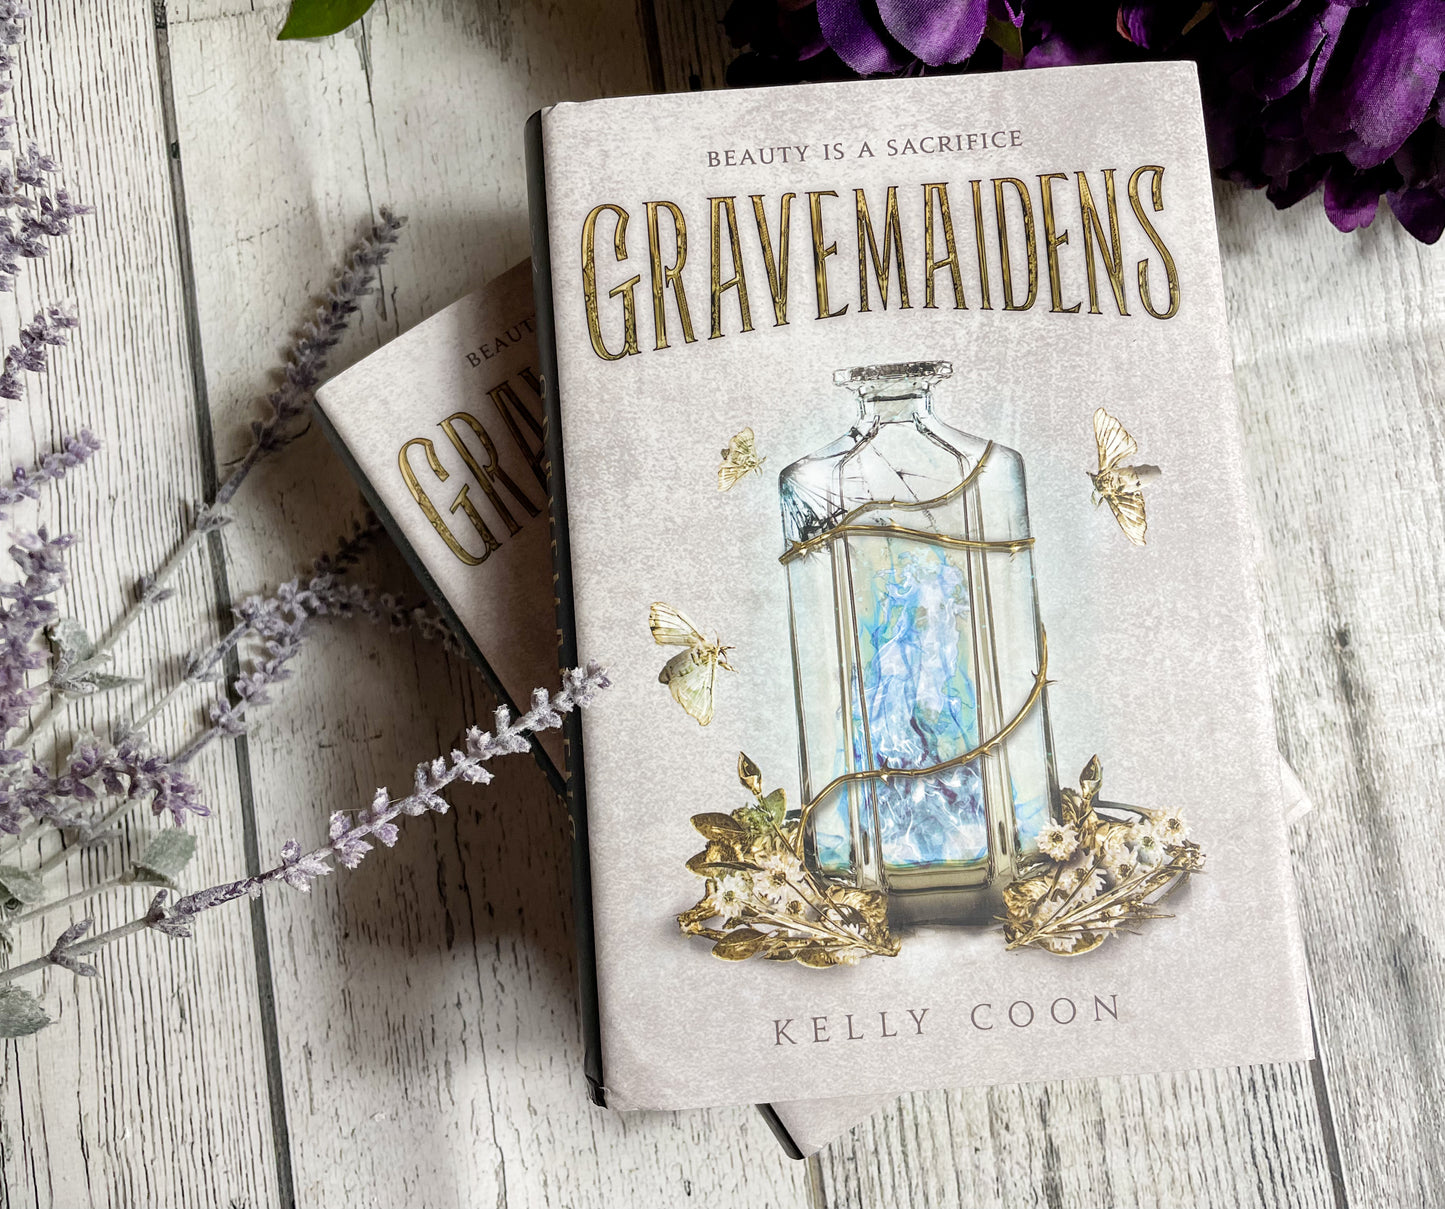 Gravemaidens (Gravemaidens #1) by Kelly Coon